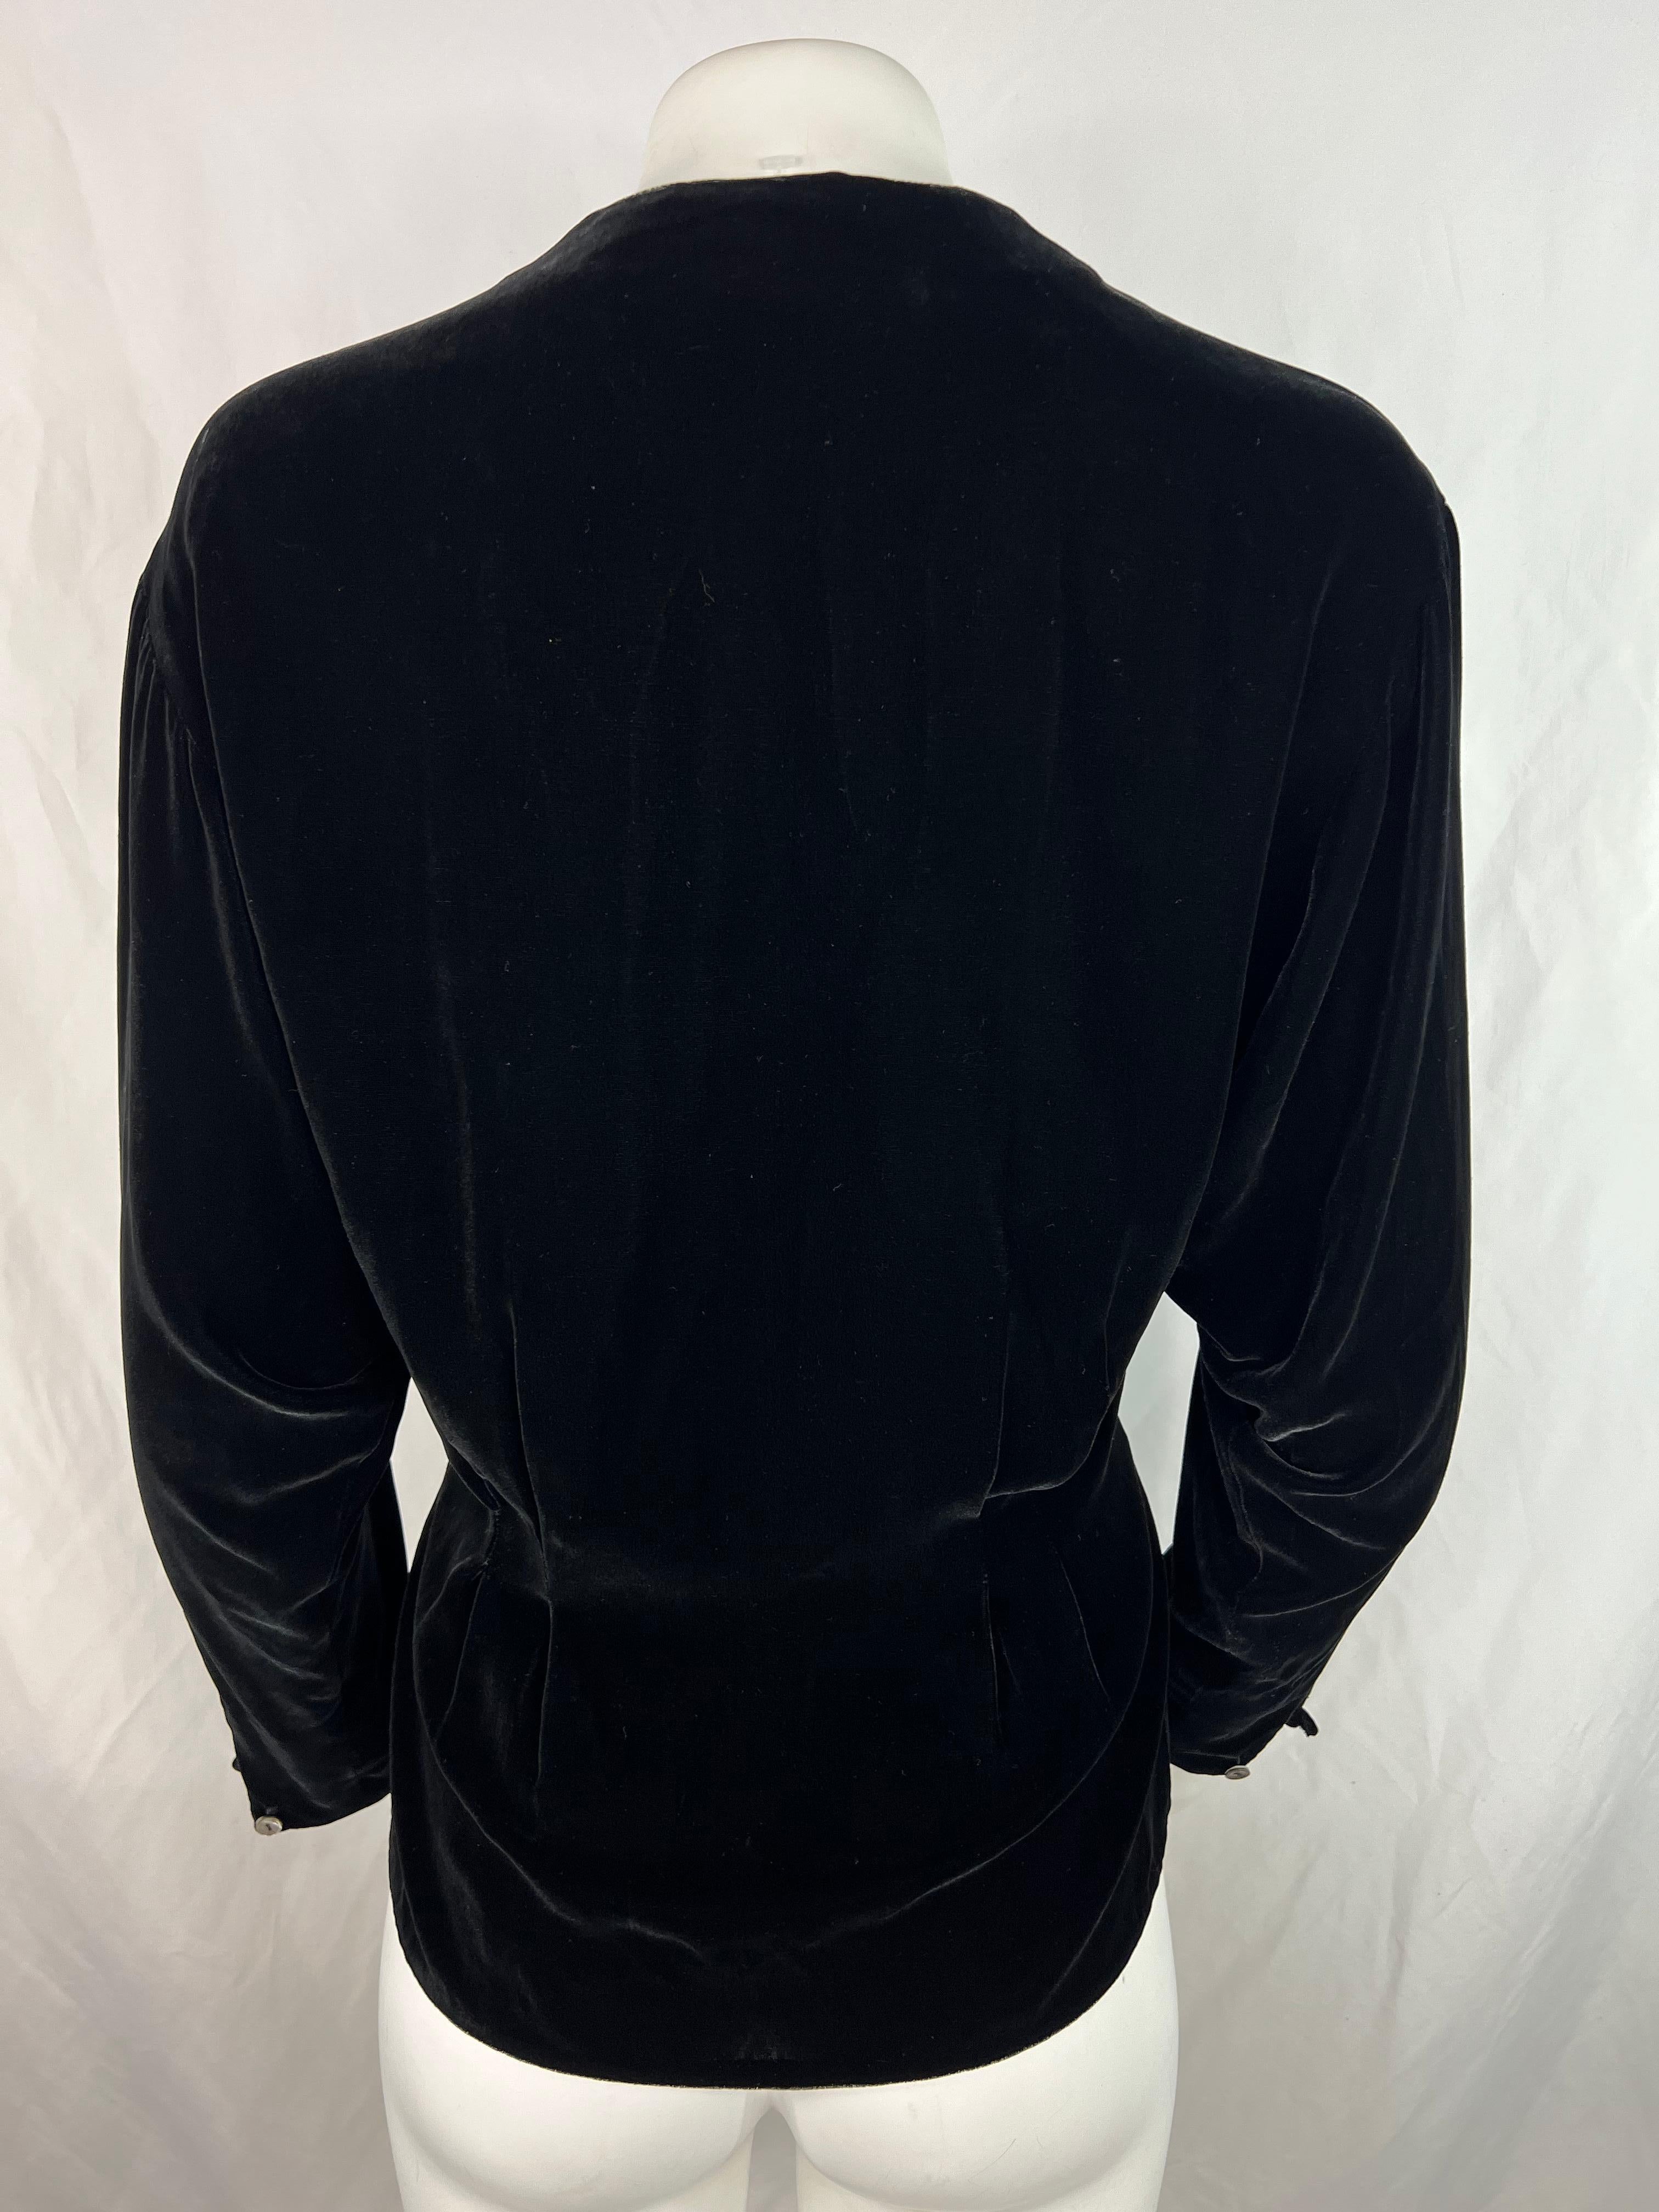 Ralph Laurent Black Velvet Top Blouse, Size 10 In Excellent Condition For Sale In Beverly Hills, CA